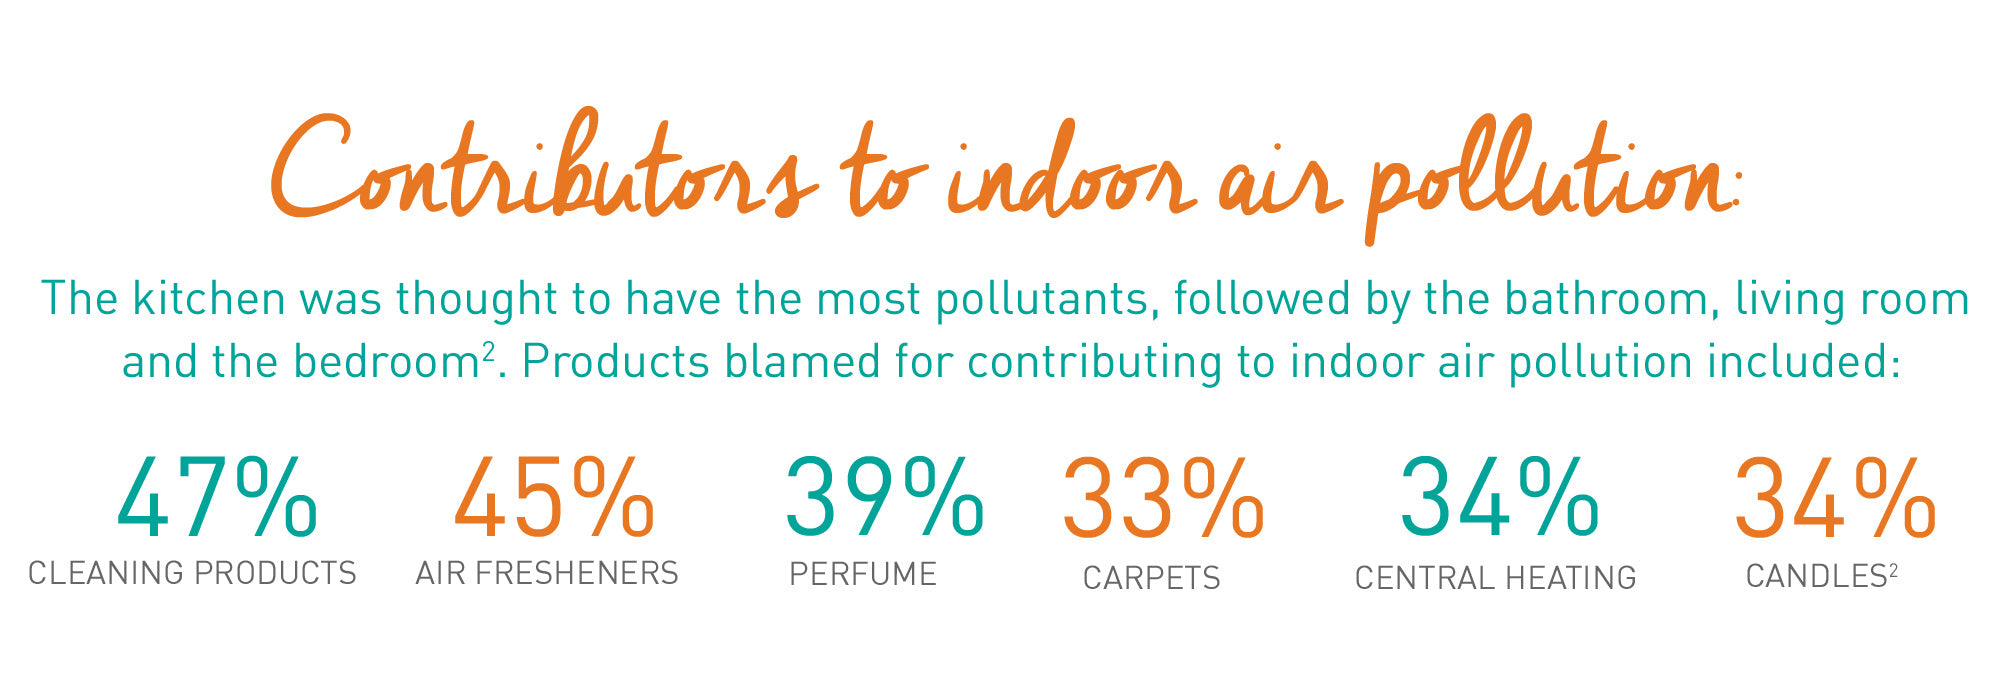 air pollution stats 